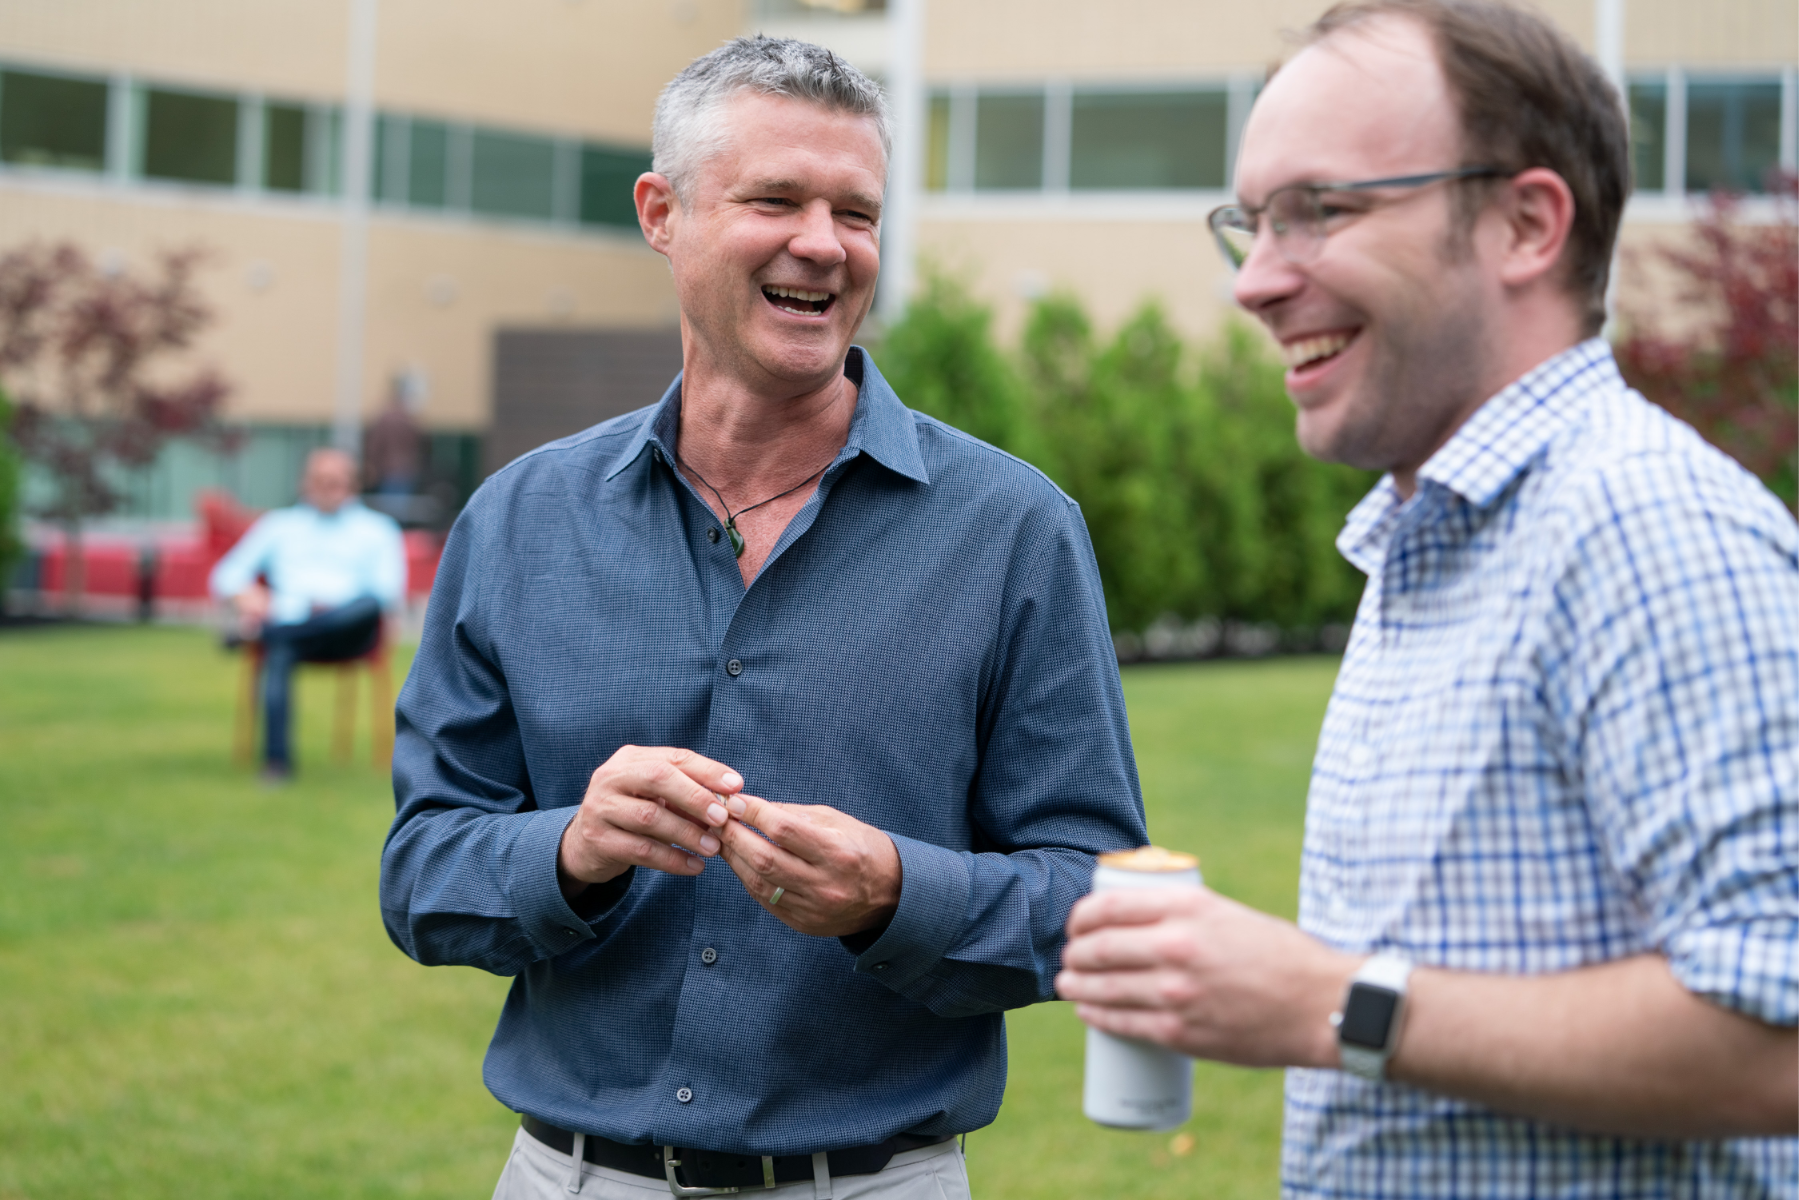 Image of two laughing employees standing in an outdoor office courtyard